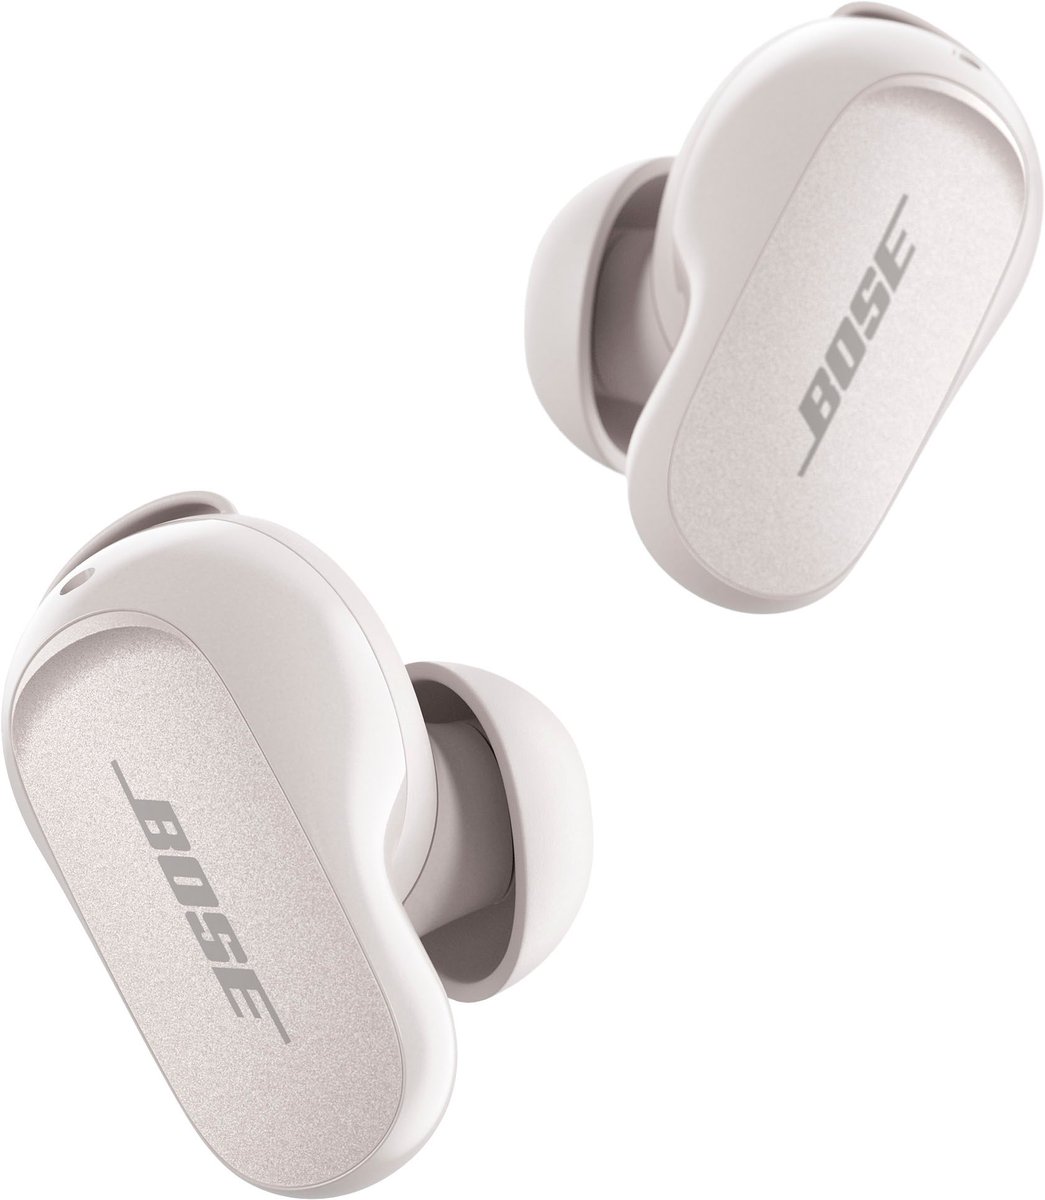 Chatted with @BoseService on 5-7, printed return label and shipped defective ear buds same day. They received old ones on 5-8 and  Bose shipped me a replacement on 5-8. Got the new one in my hands at 3:30 pm on 5-9-24. What great service @Bose #greatservice #boserocks